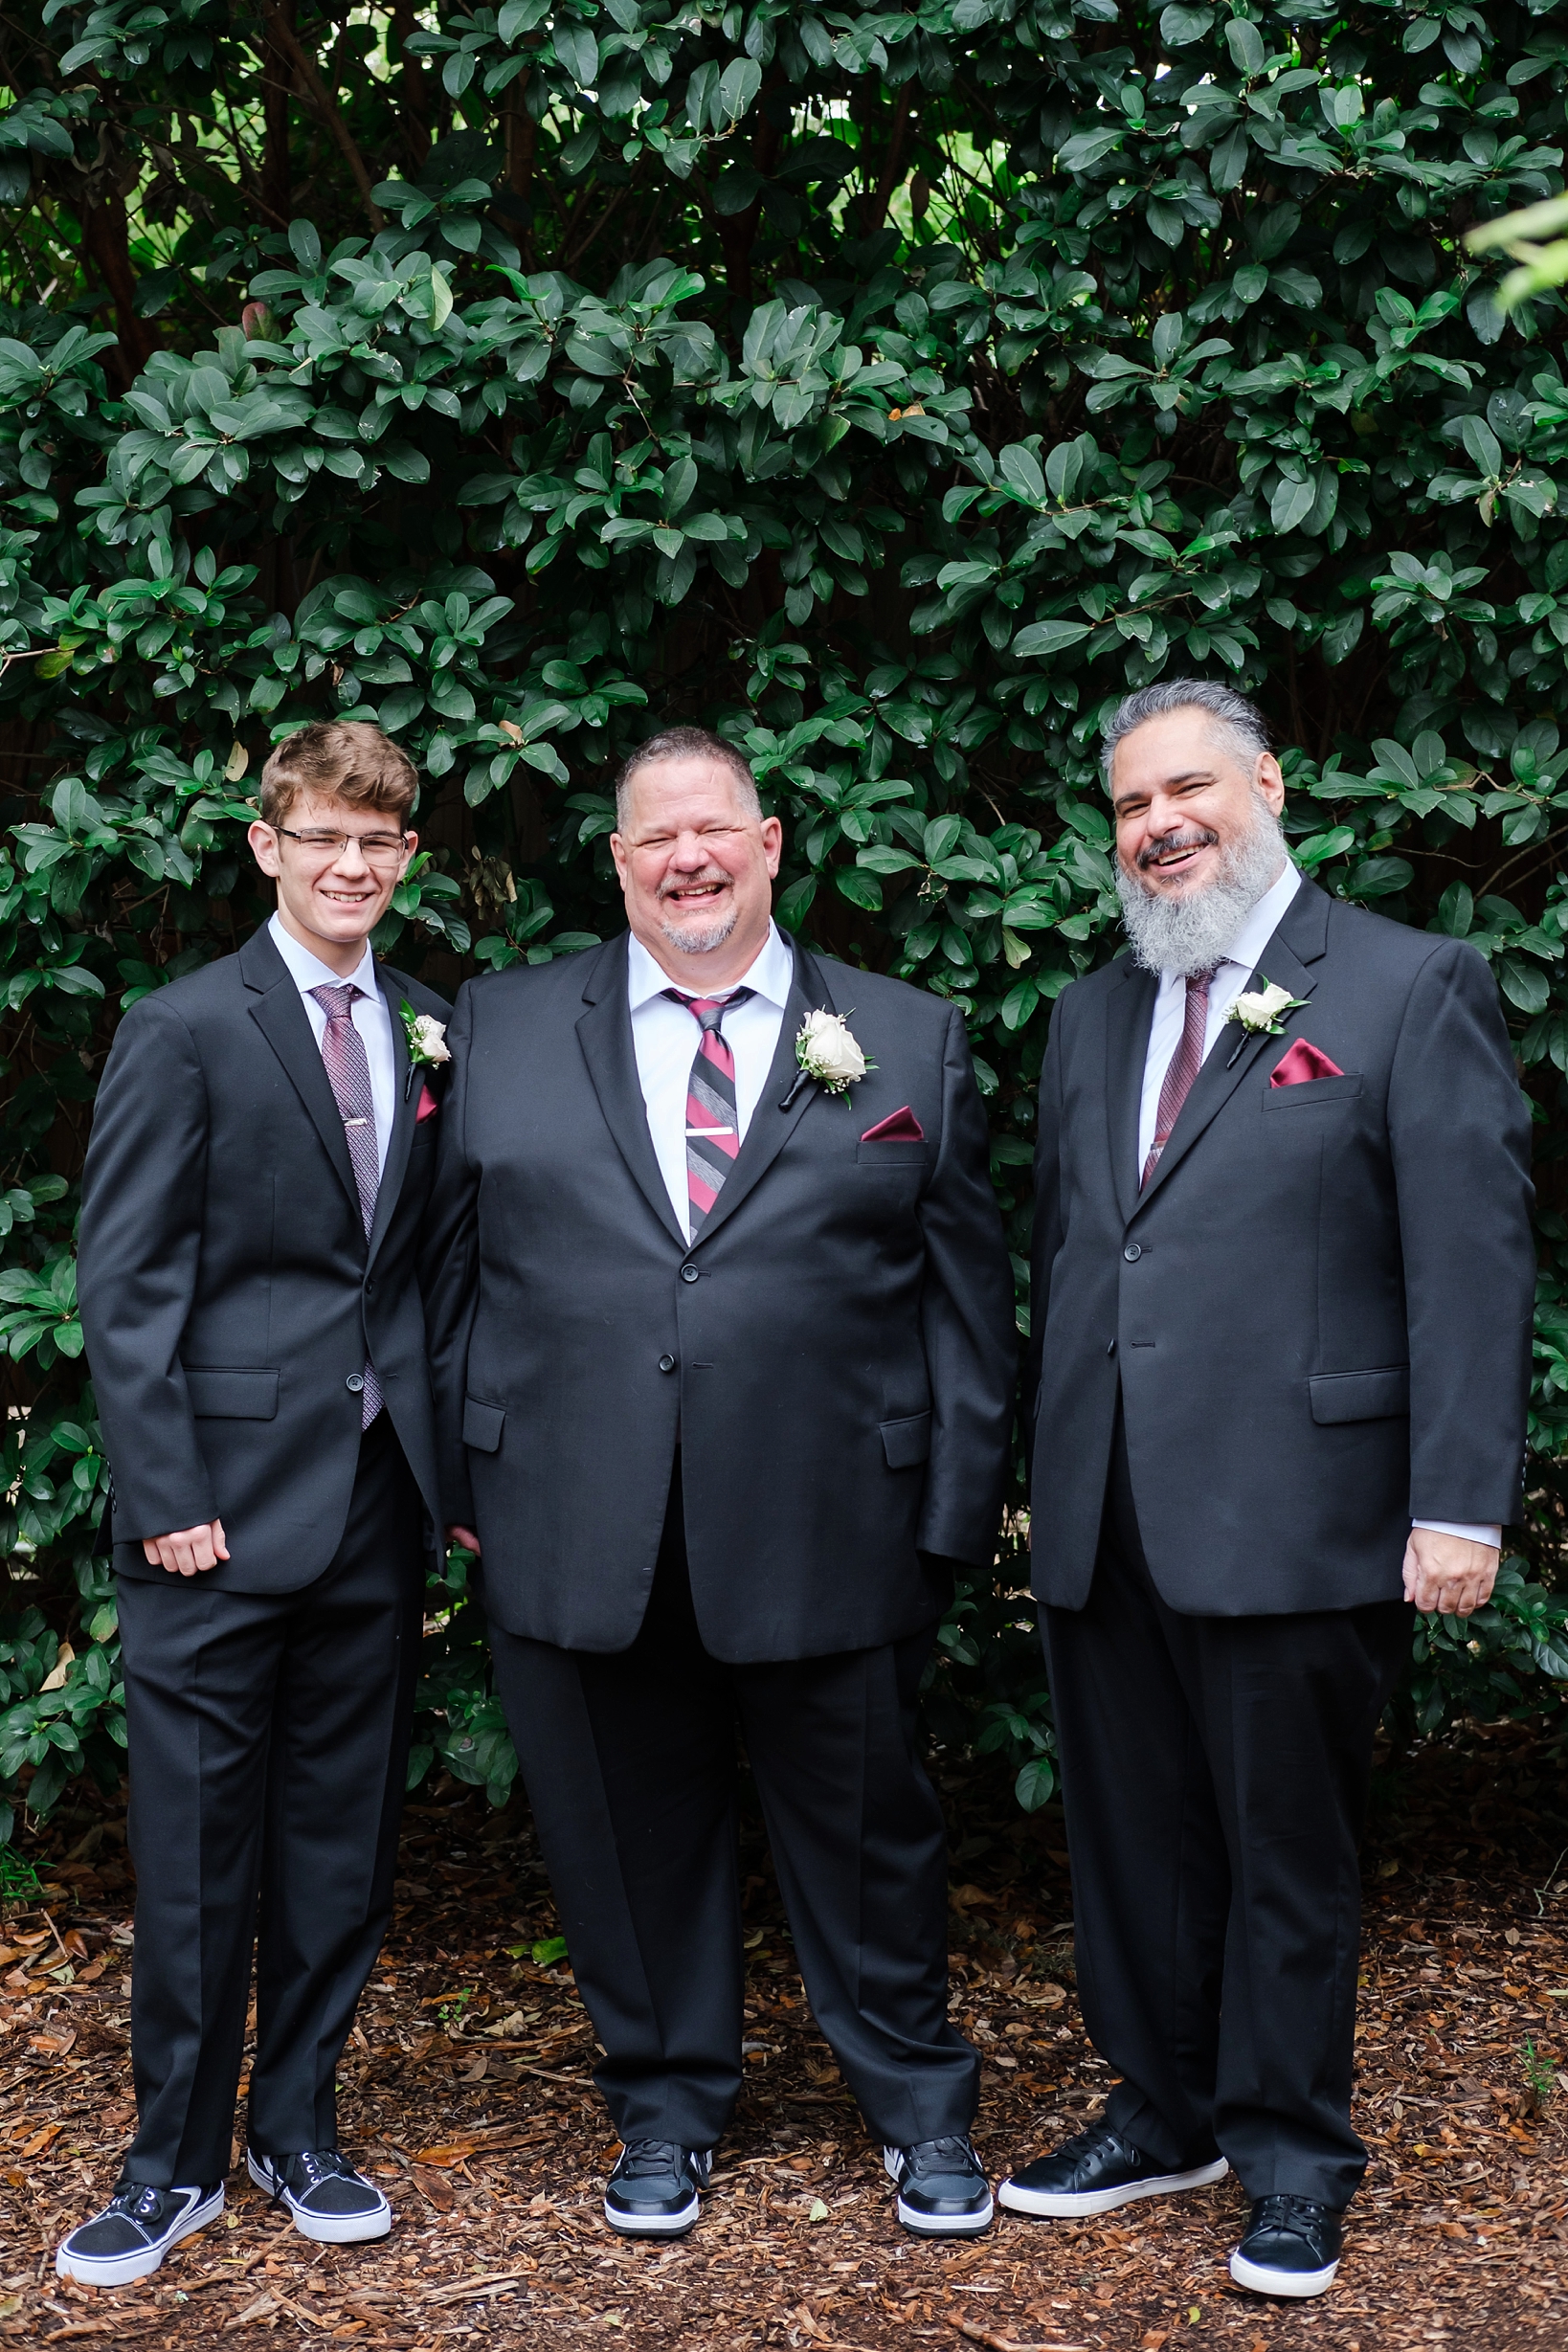 Wedding Suits Fit For Any Groom - Cross Creek Ranch FL